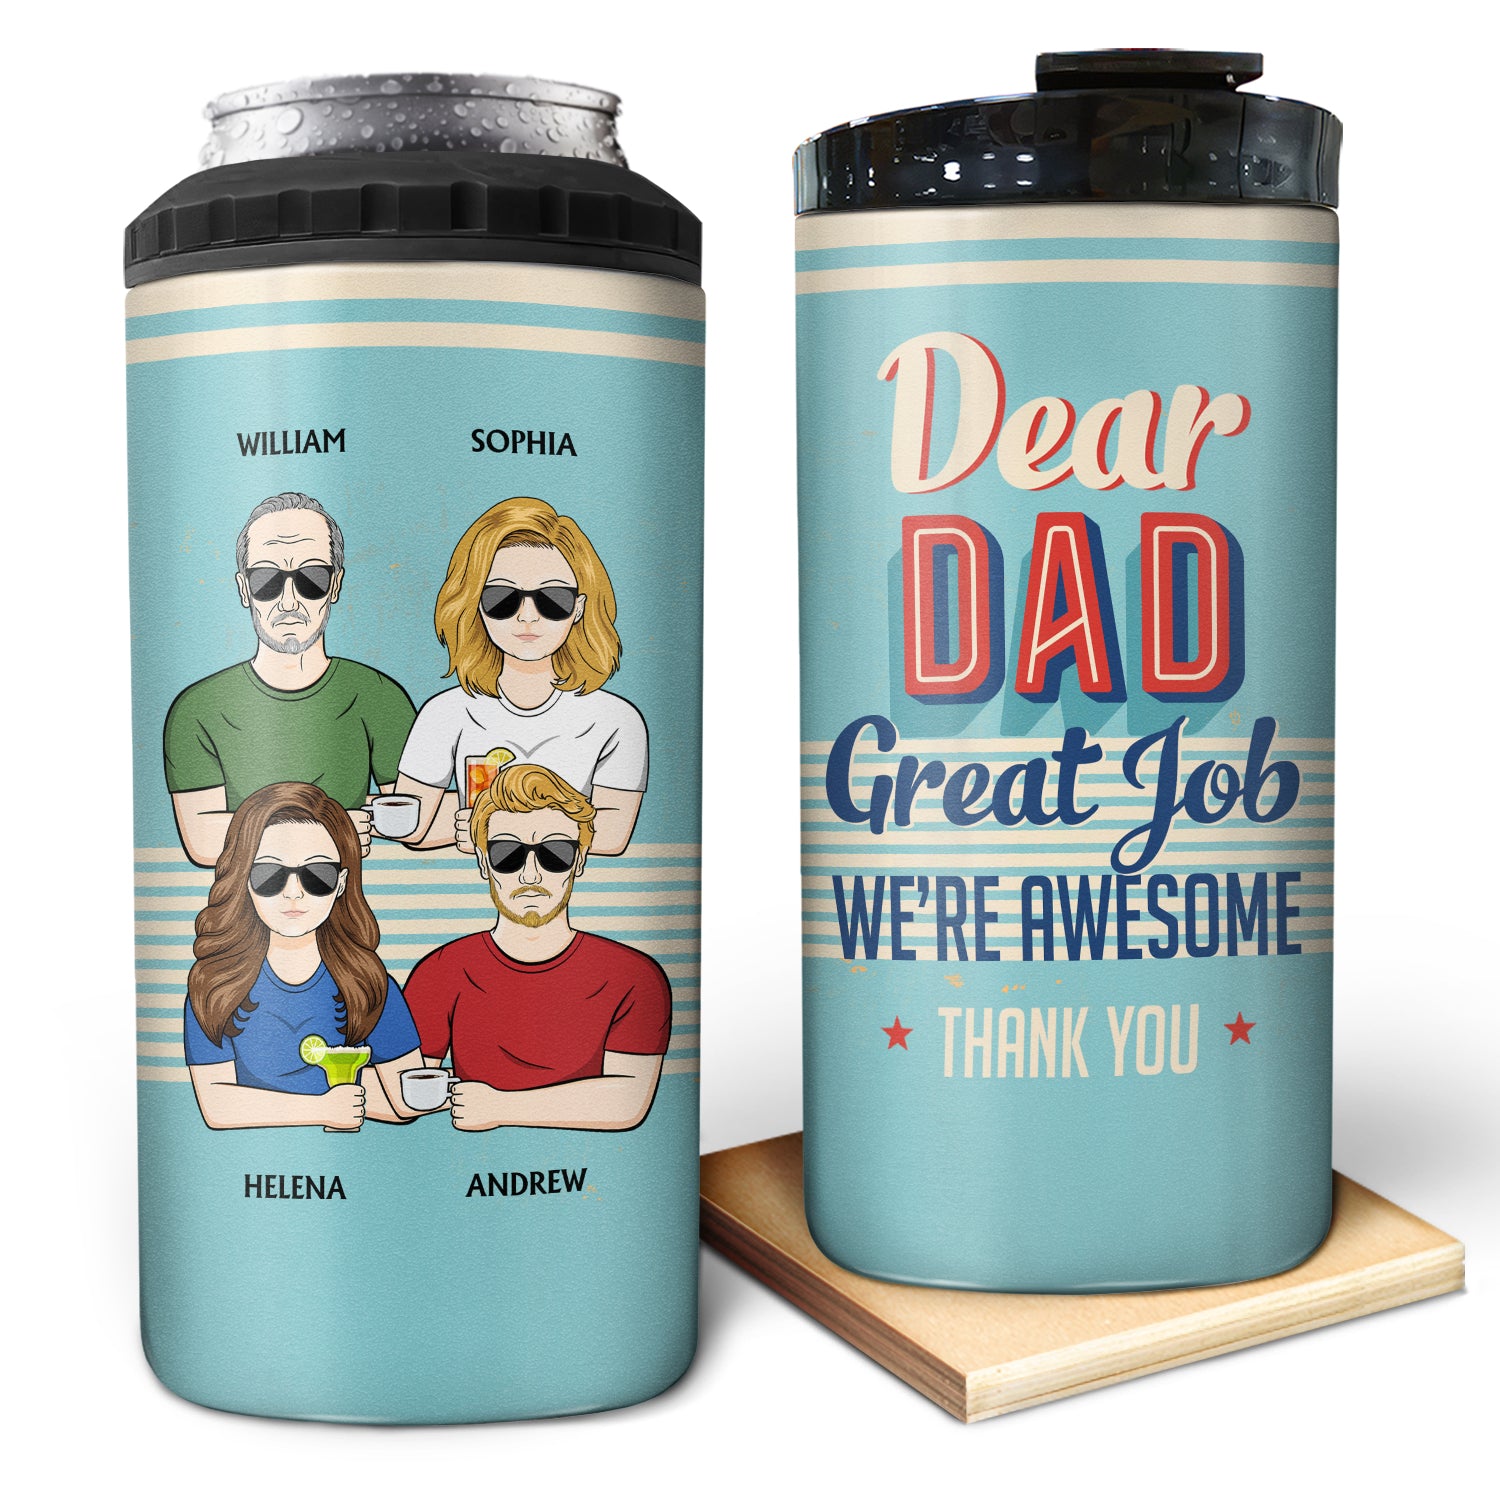 Dear Dad Great Job We're Awesome Thank You - Birthday, Loving Gift For Father, Grandpa, Grandfather - Personalized Custom 4 In 1 Can Cooler Tumbler